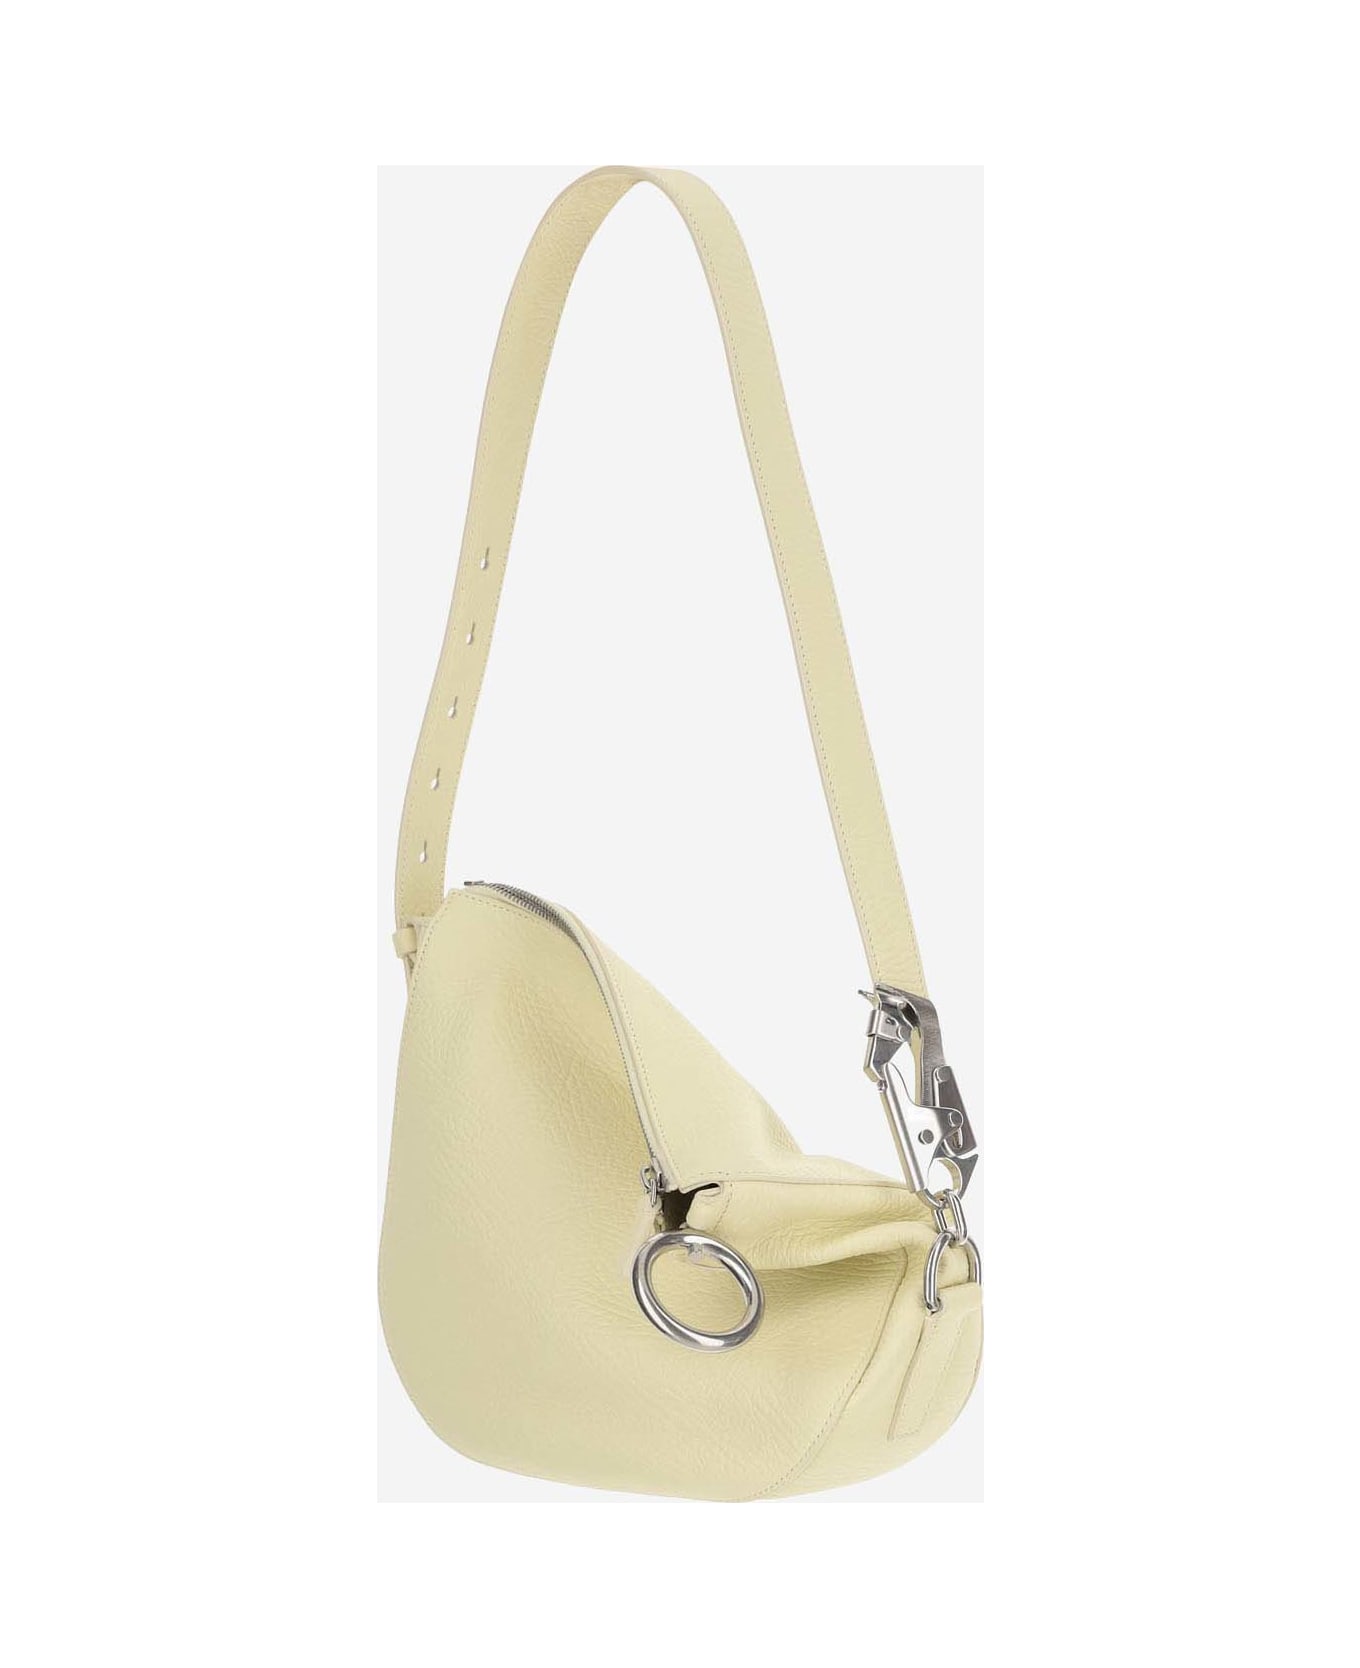 Burberry Small Knight Bag - Yellow